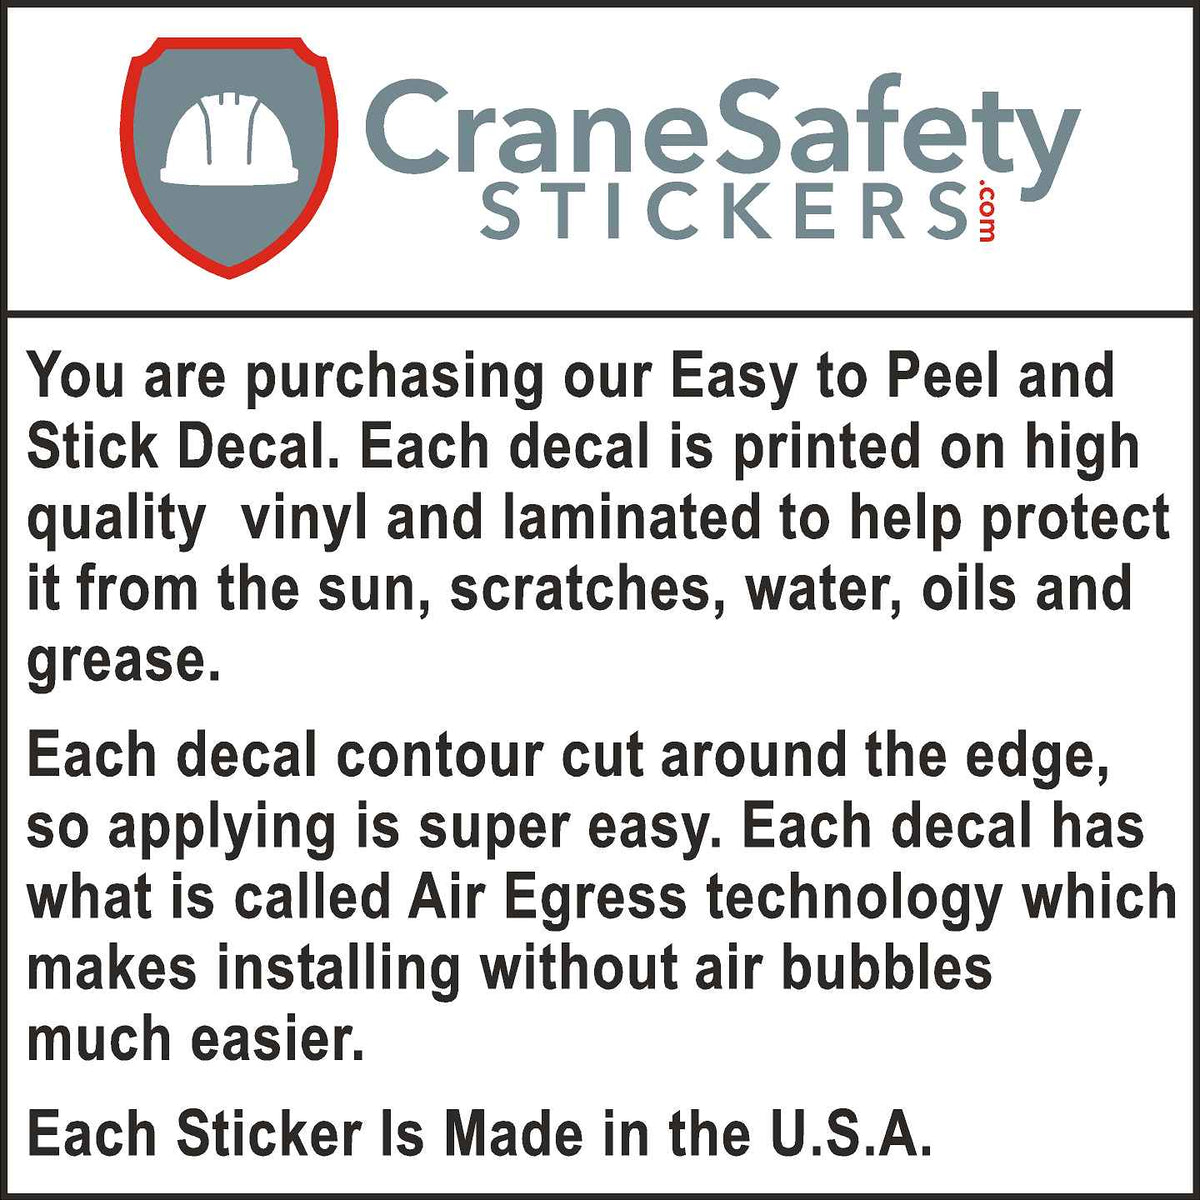 Quality of our safety is no accident hard hat sticker.